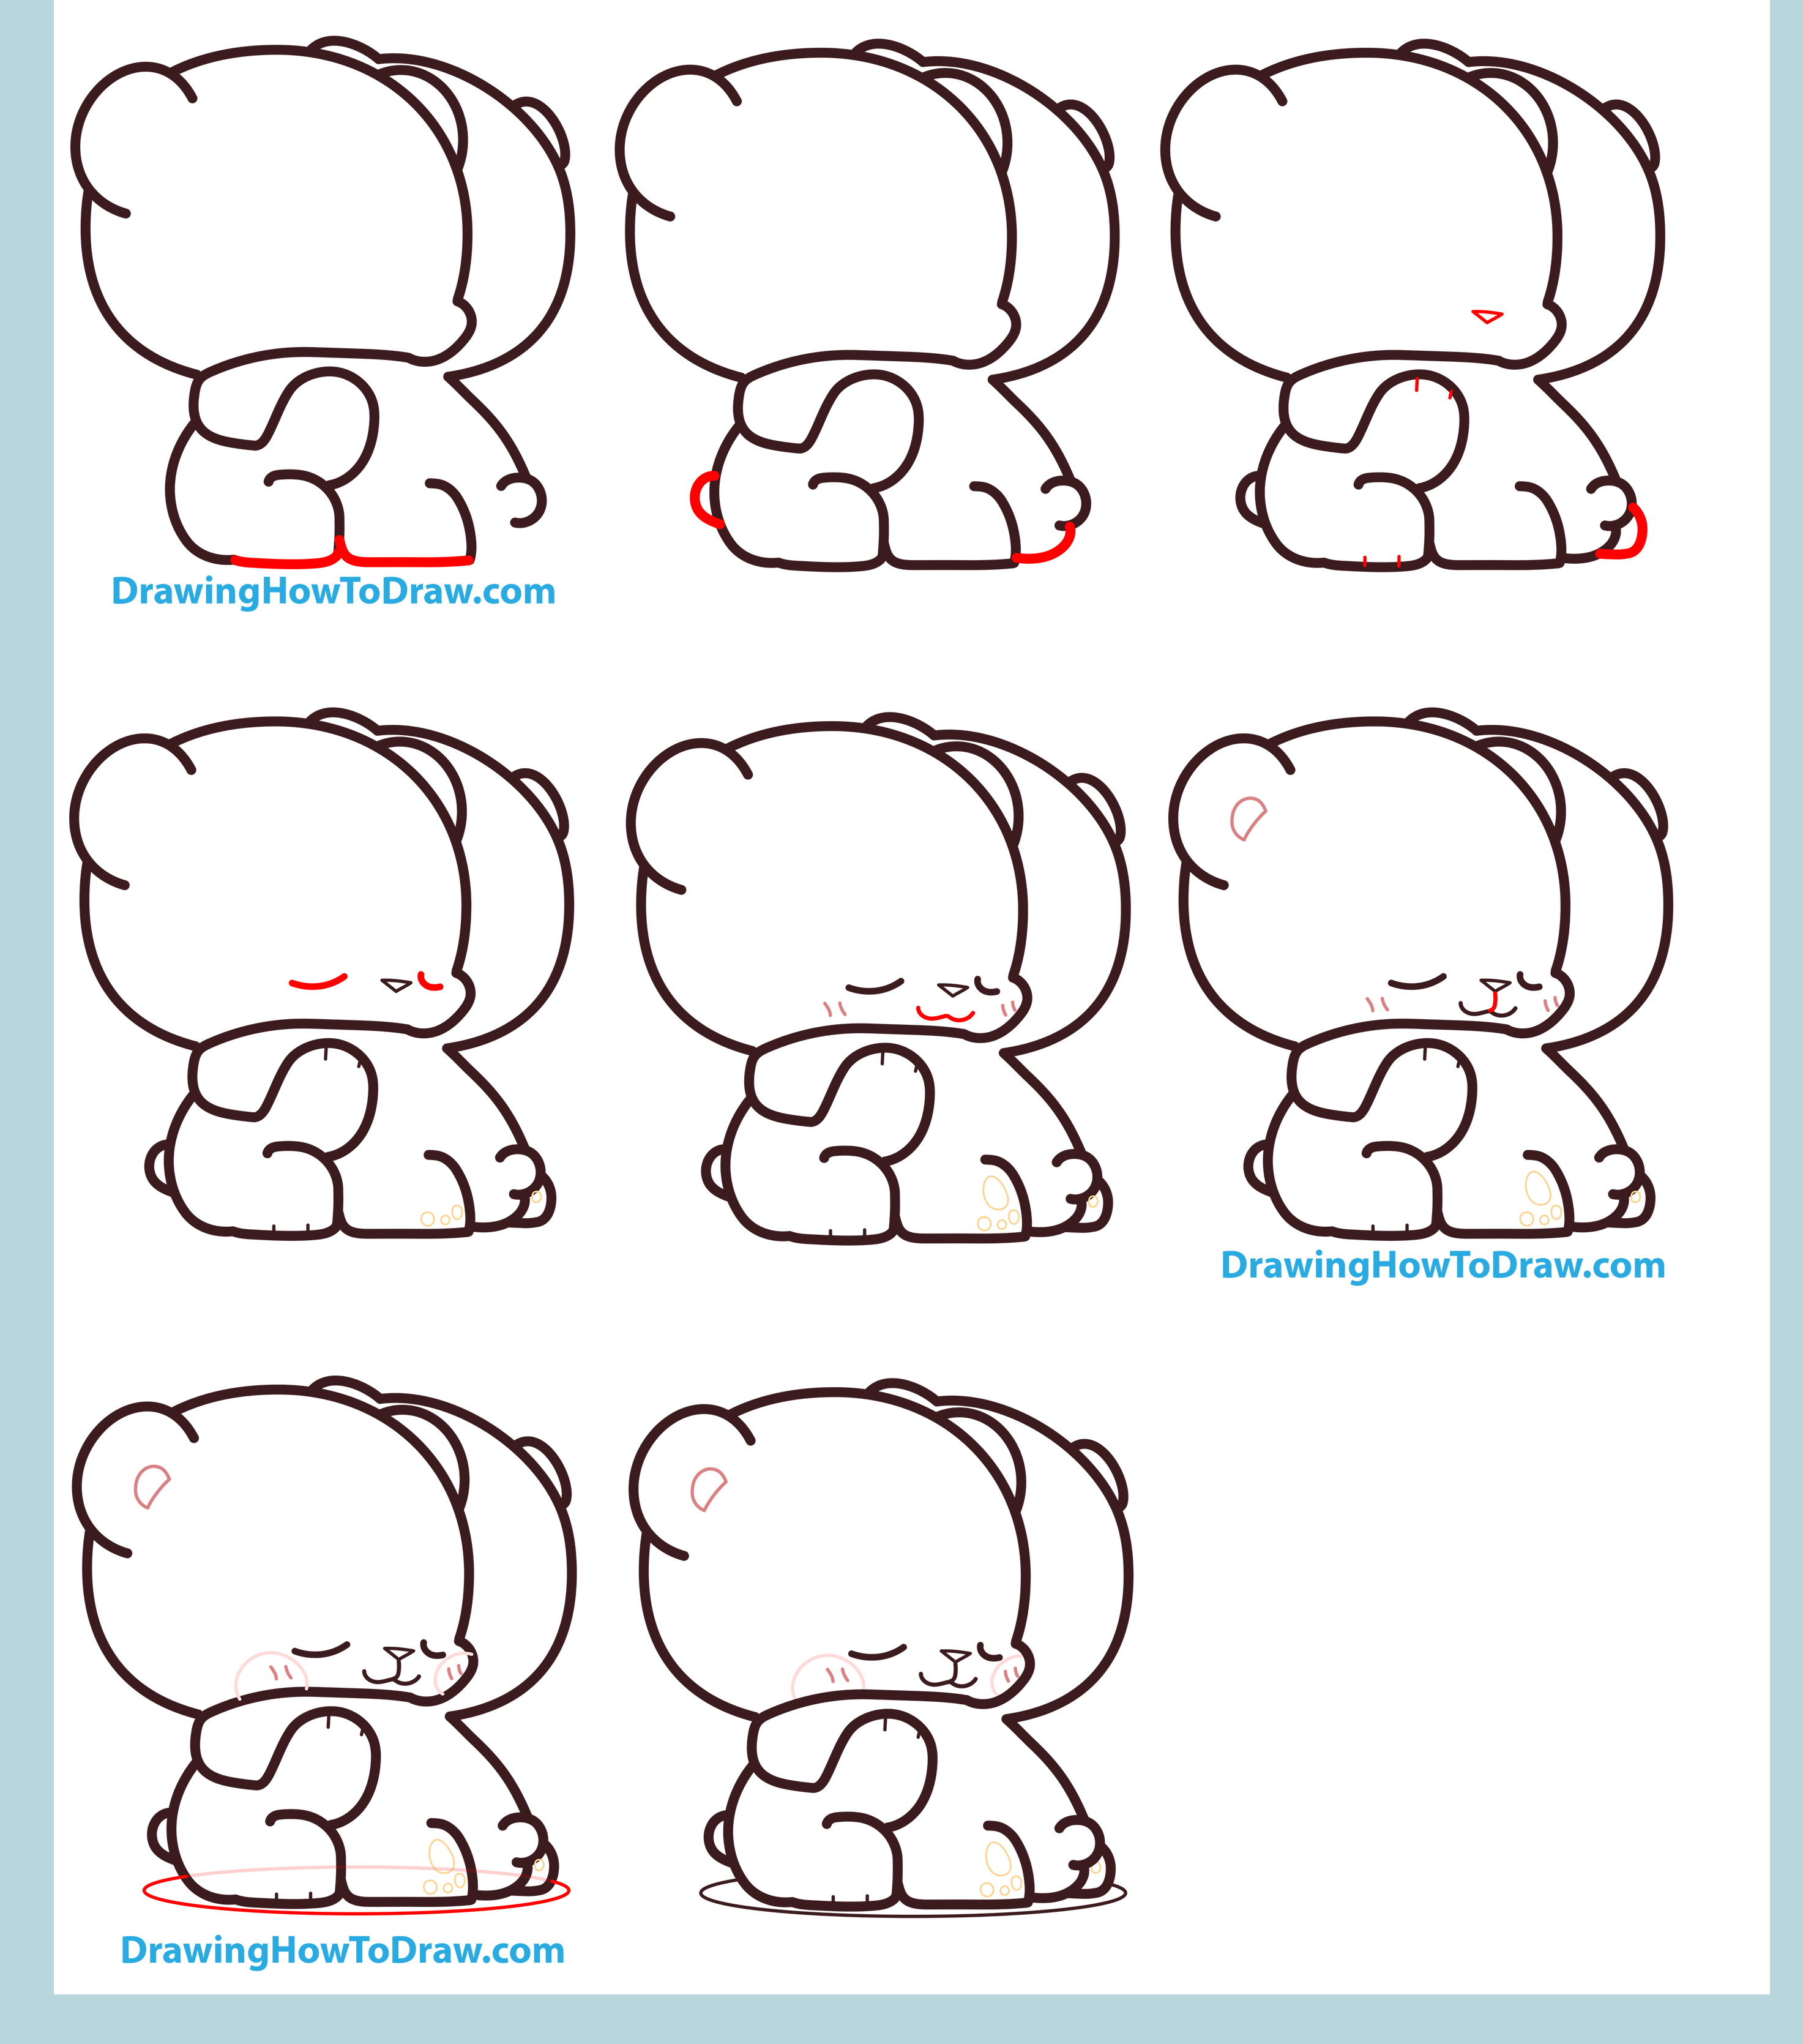 How to Draw The 2 Kawaii / Chibi Bears Hugging from Milk and Mocha - Easy Step by Step Drawing Tutorial